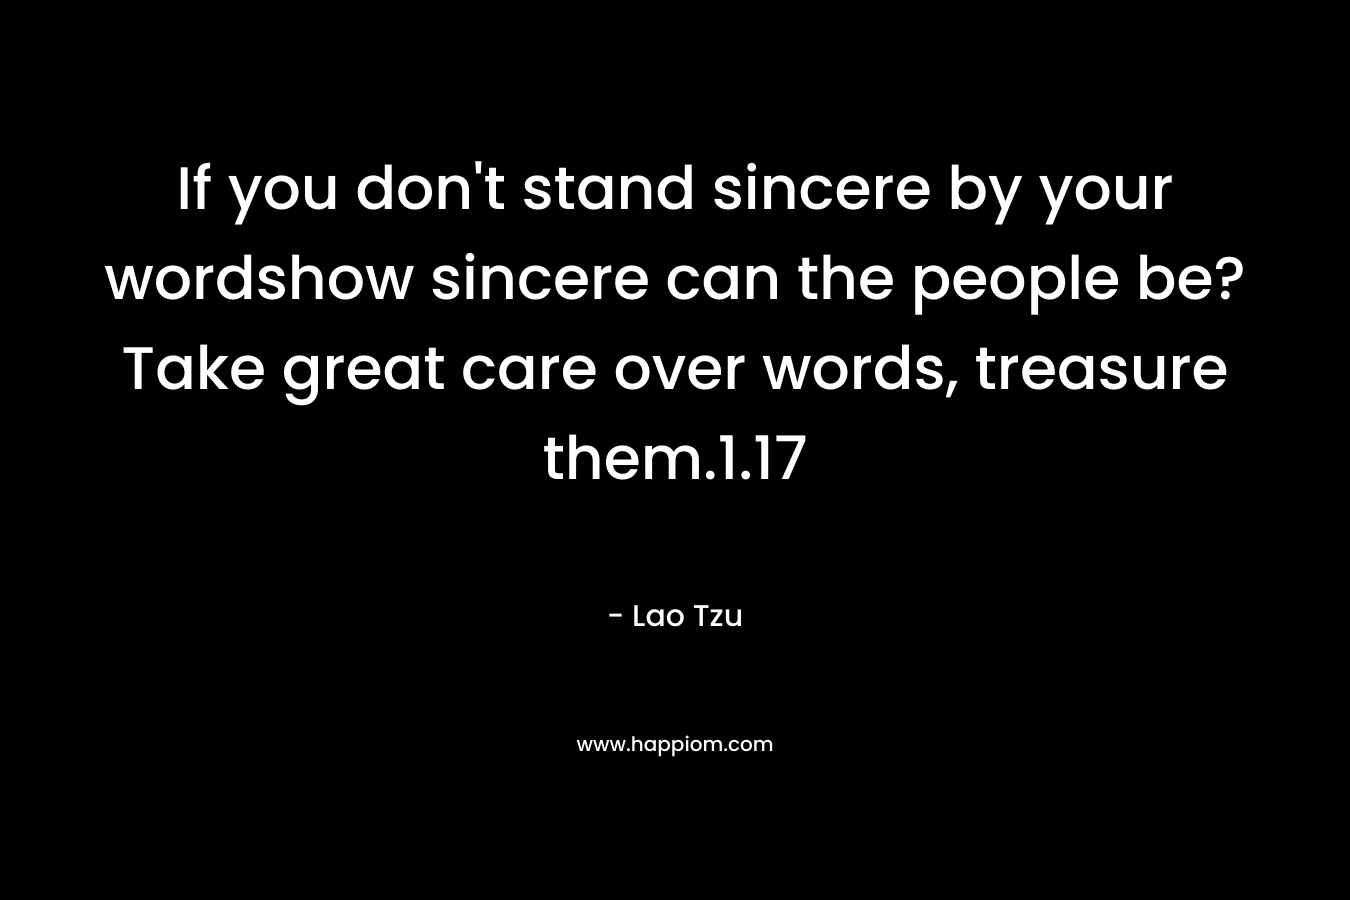 If you don’t stand sincere by your wordshow sincere can the people be?Take great care over words, treasure them.1.17 – Lao Tzu